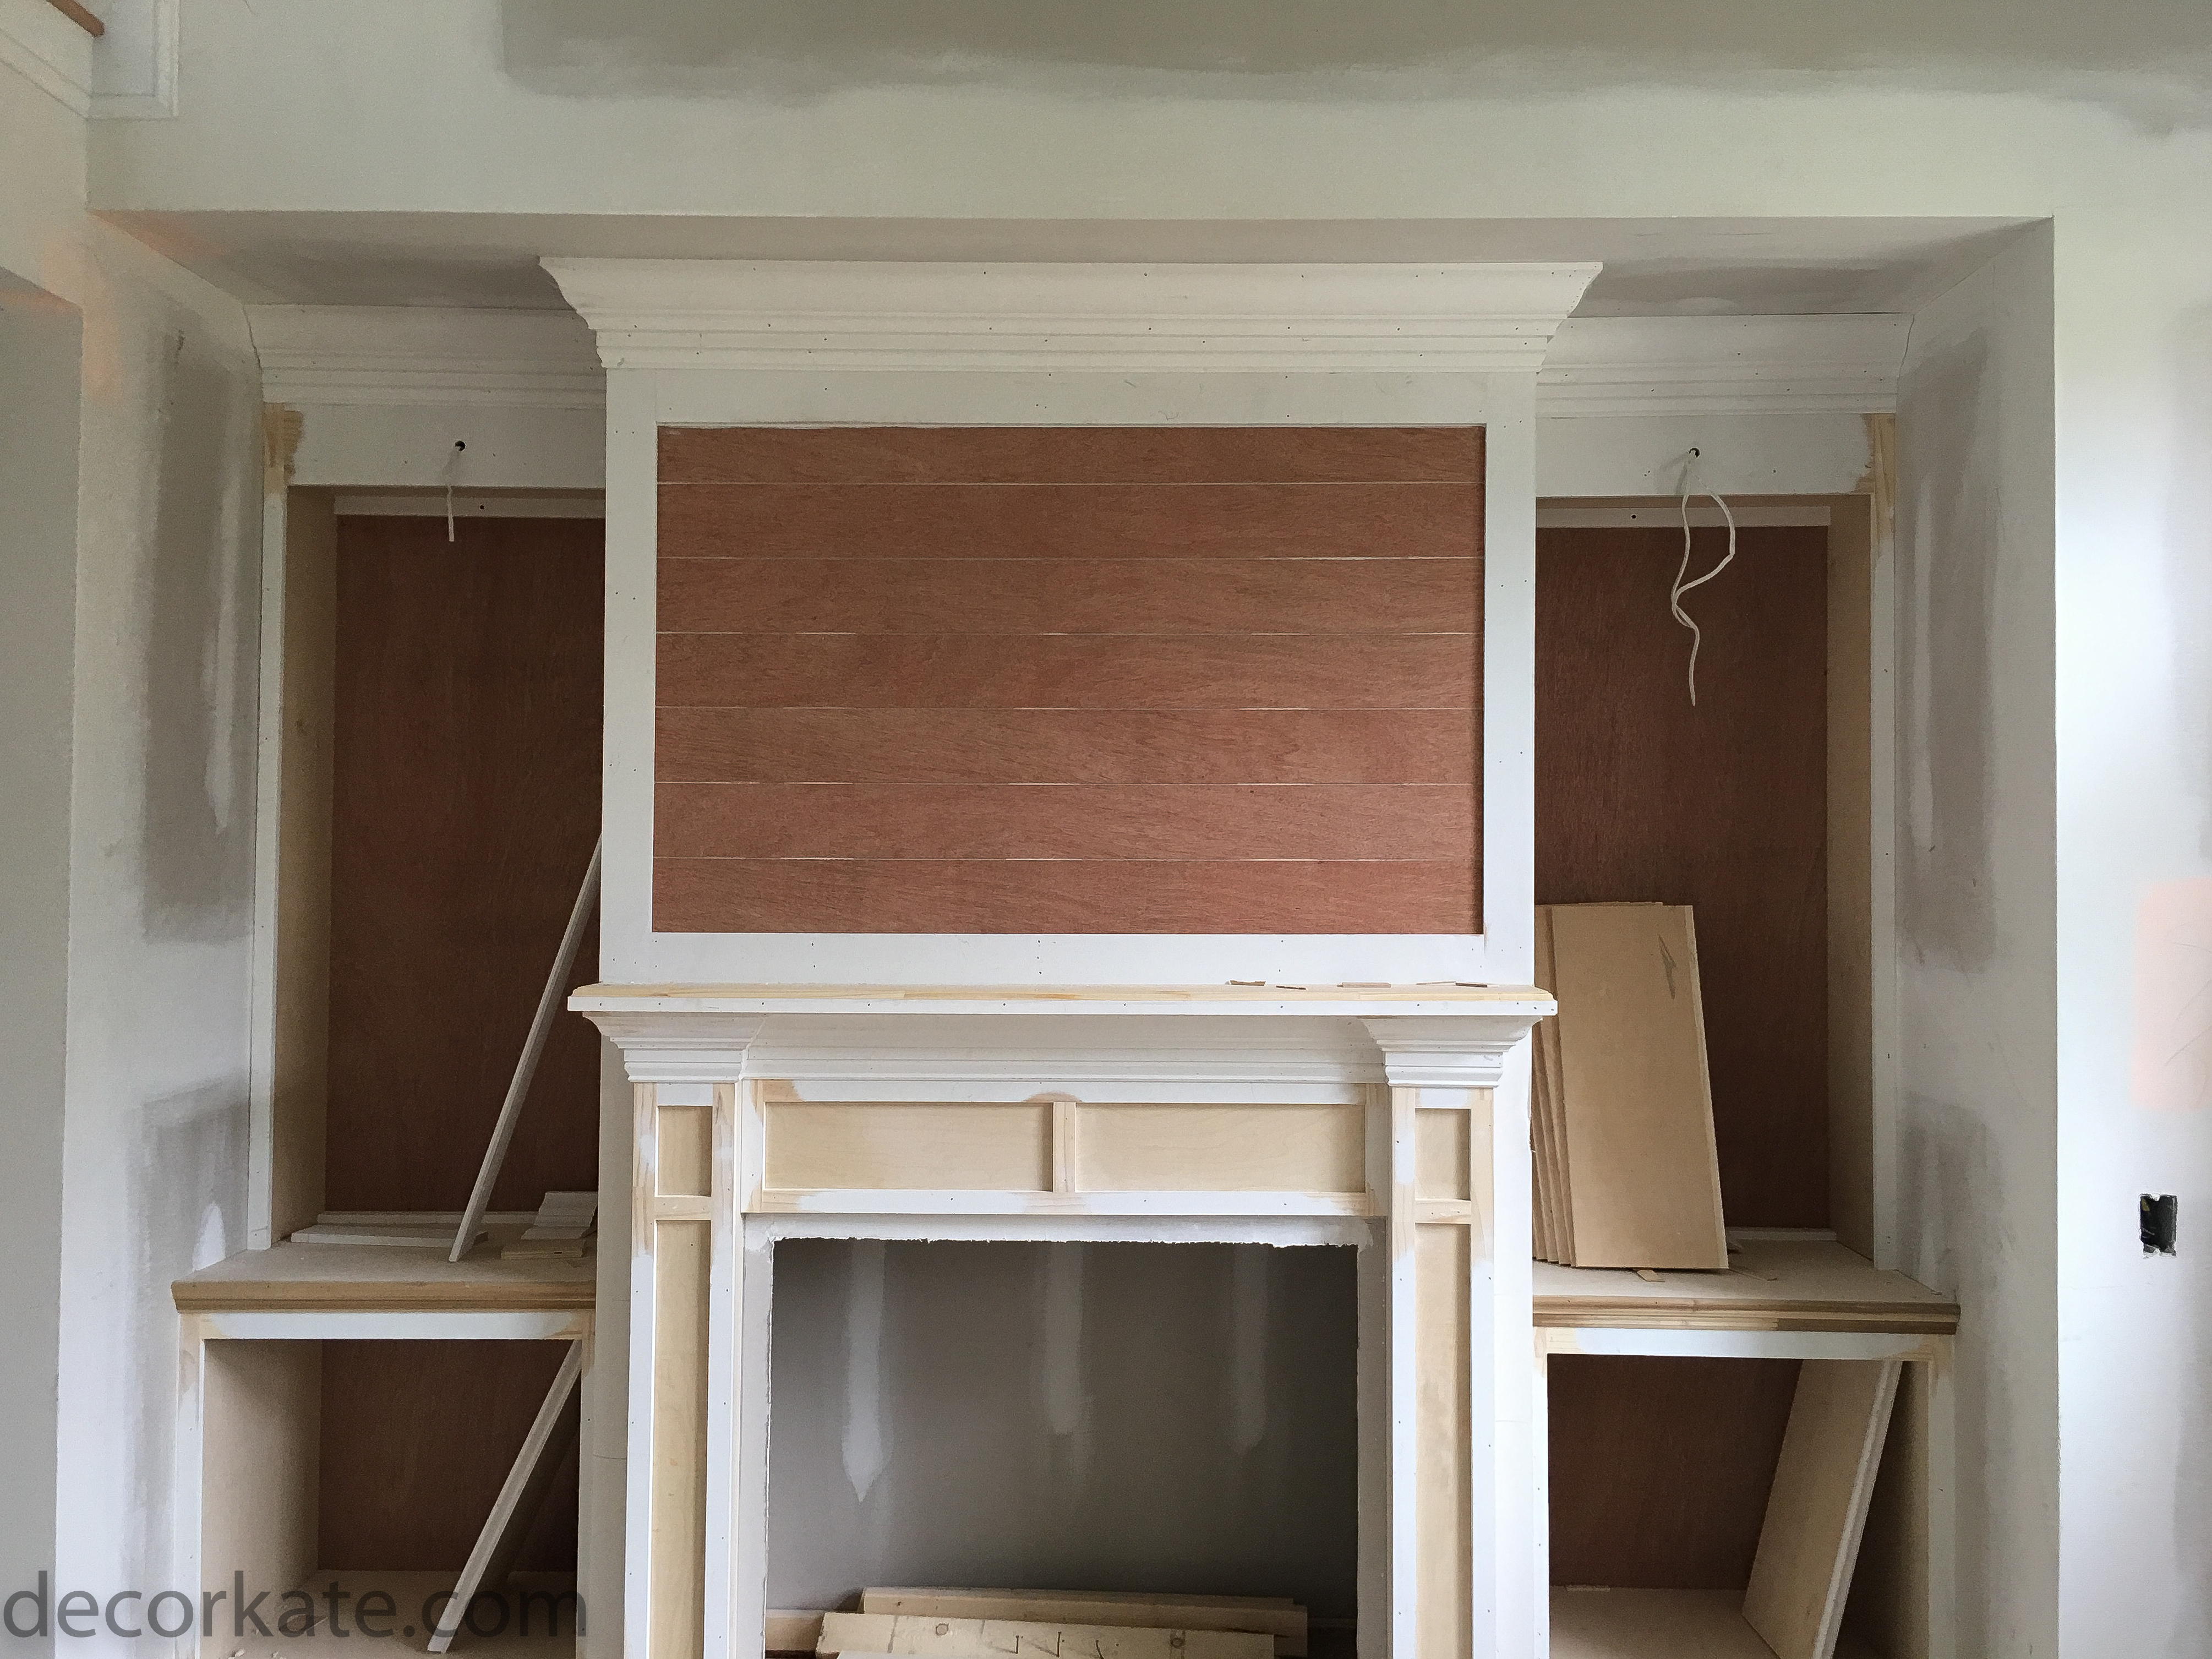 Building a Fireplace with Built-Ins